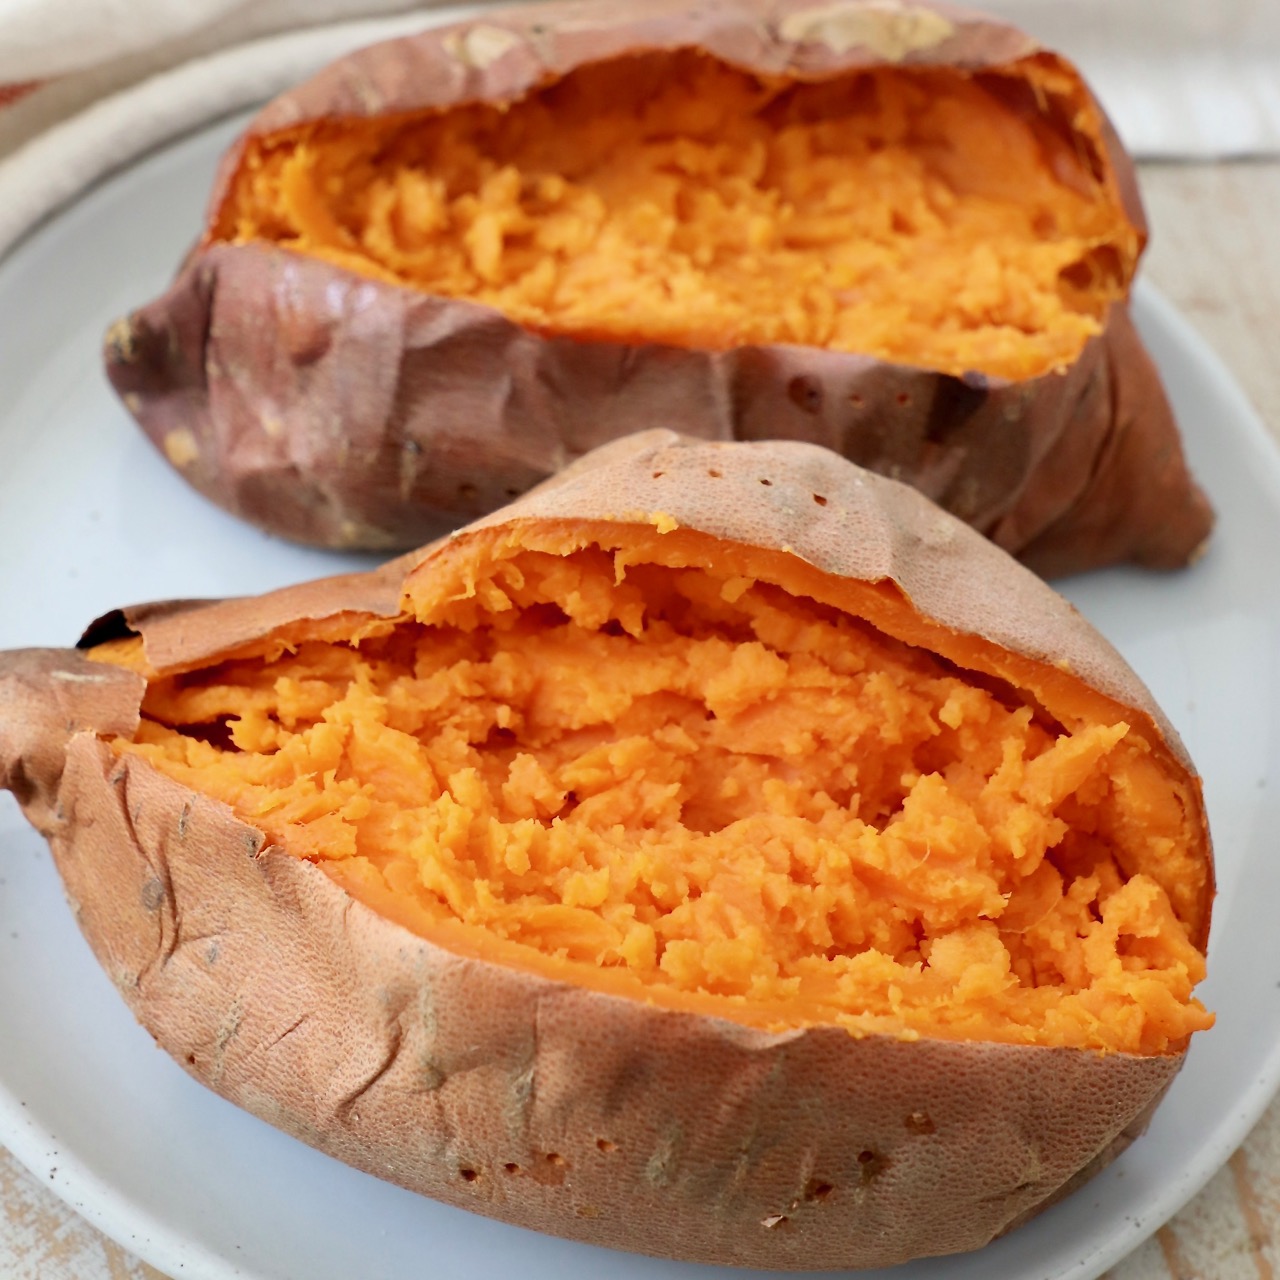 https://whitneybond.com/wp-content/uploads/2022/09/how-to-cook-sweet-potatoes-10.jpg